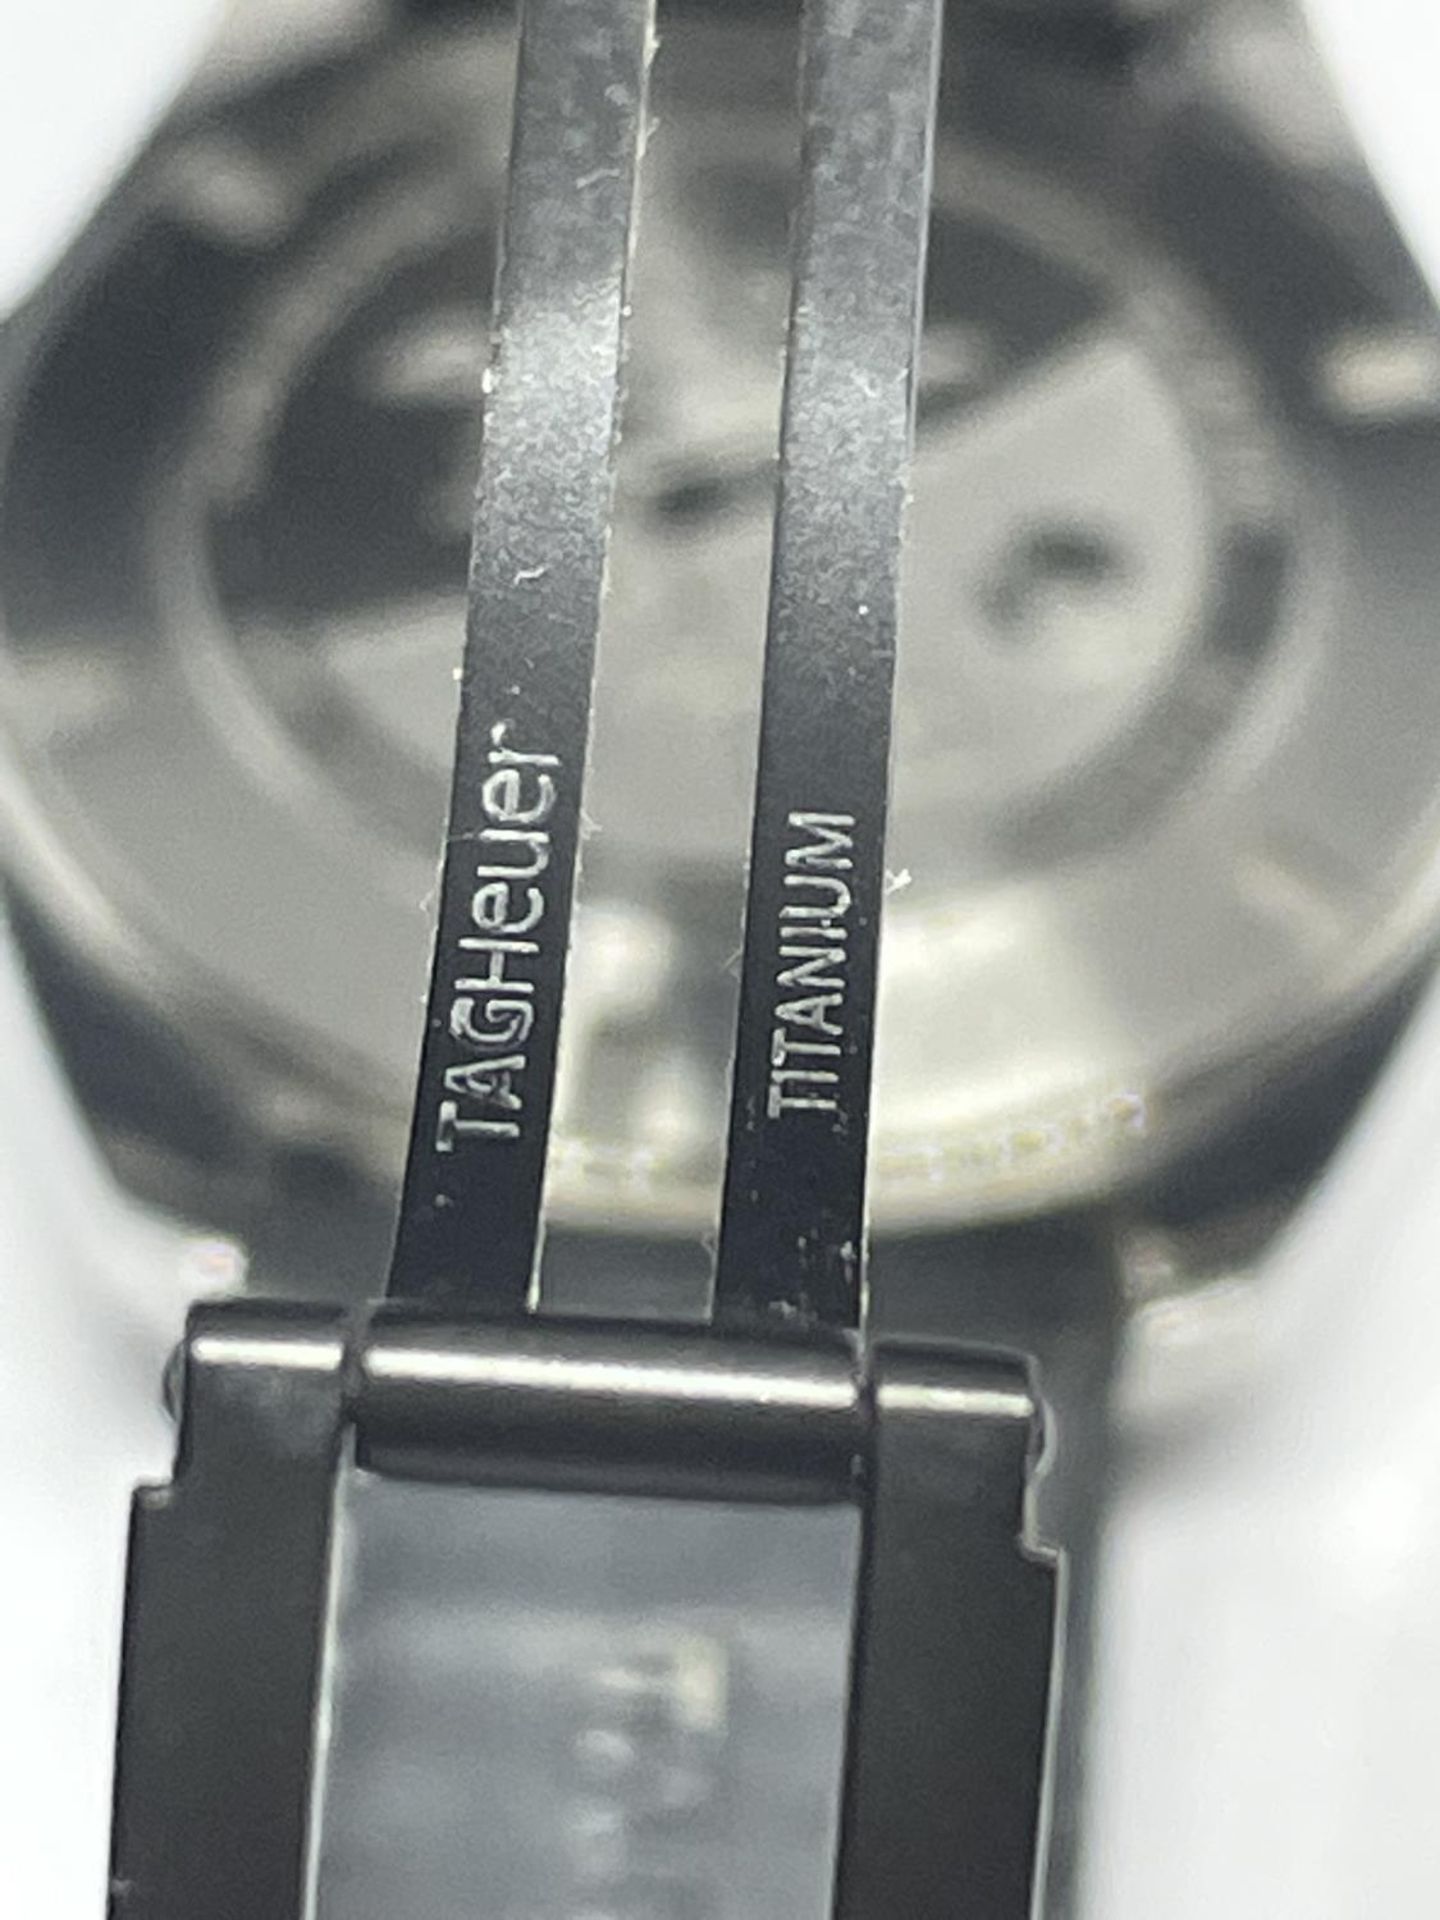 A TAG HEUER AQUARACER CALIBRE 5 AUTOMATIC WRIST WATCH SEEN WORKING BUT NO WARRANTY - Image 8 of 8